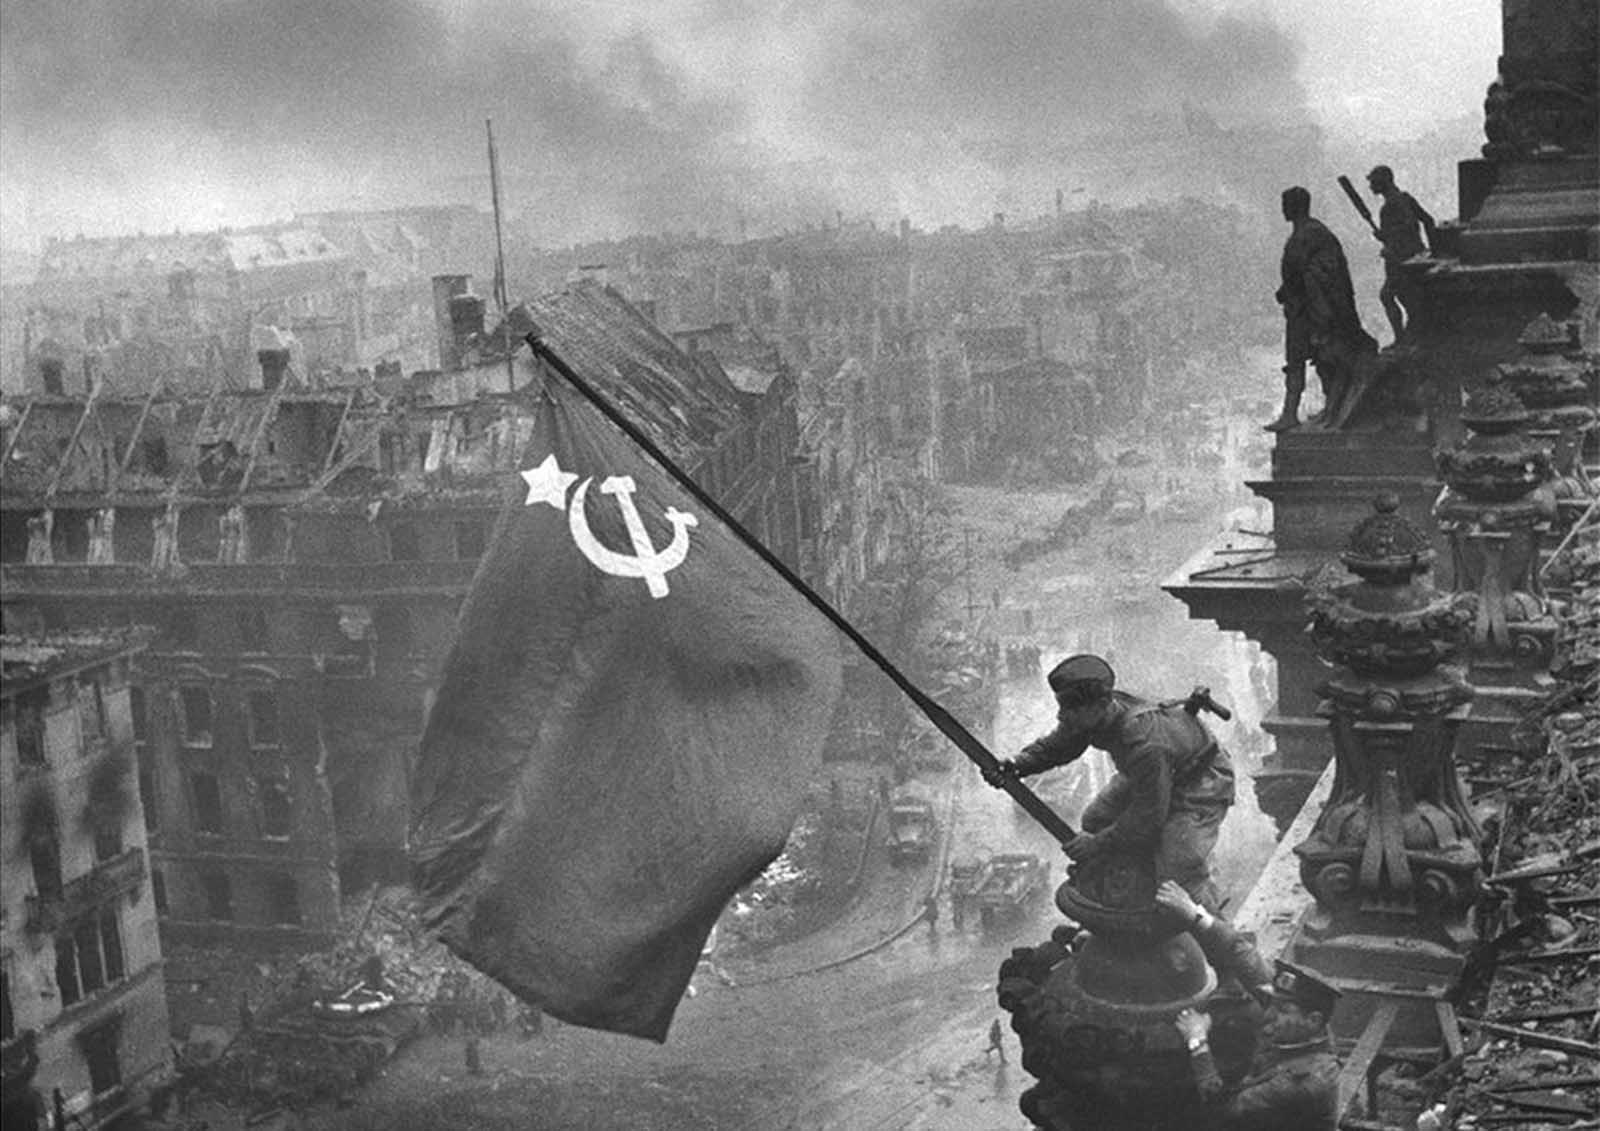 “Raising a flag over the Reichstag” the famous photograph by Yevgeny Khaldei, taken on May 2, 1945. The photo shows Soviet soldiers raising the flag of the Soviet Union on top of the German Reichstag building following the Battle of Berlin. The moment was actually a re-enactment of an earlier flag-raising, and the photo was embroiled in controversy over the identities of the soldiers, the photographer, and some significant photo editing.